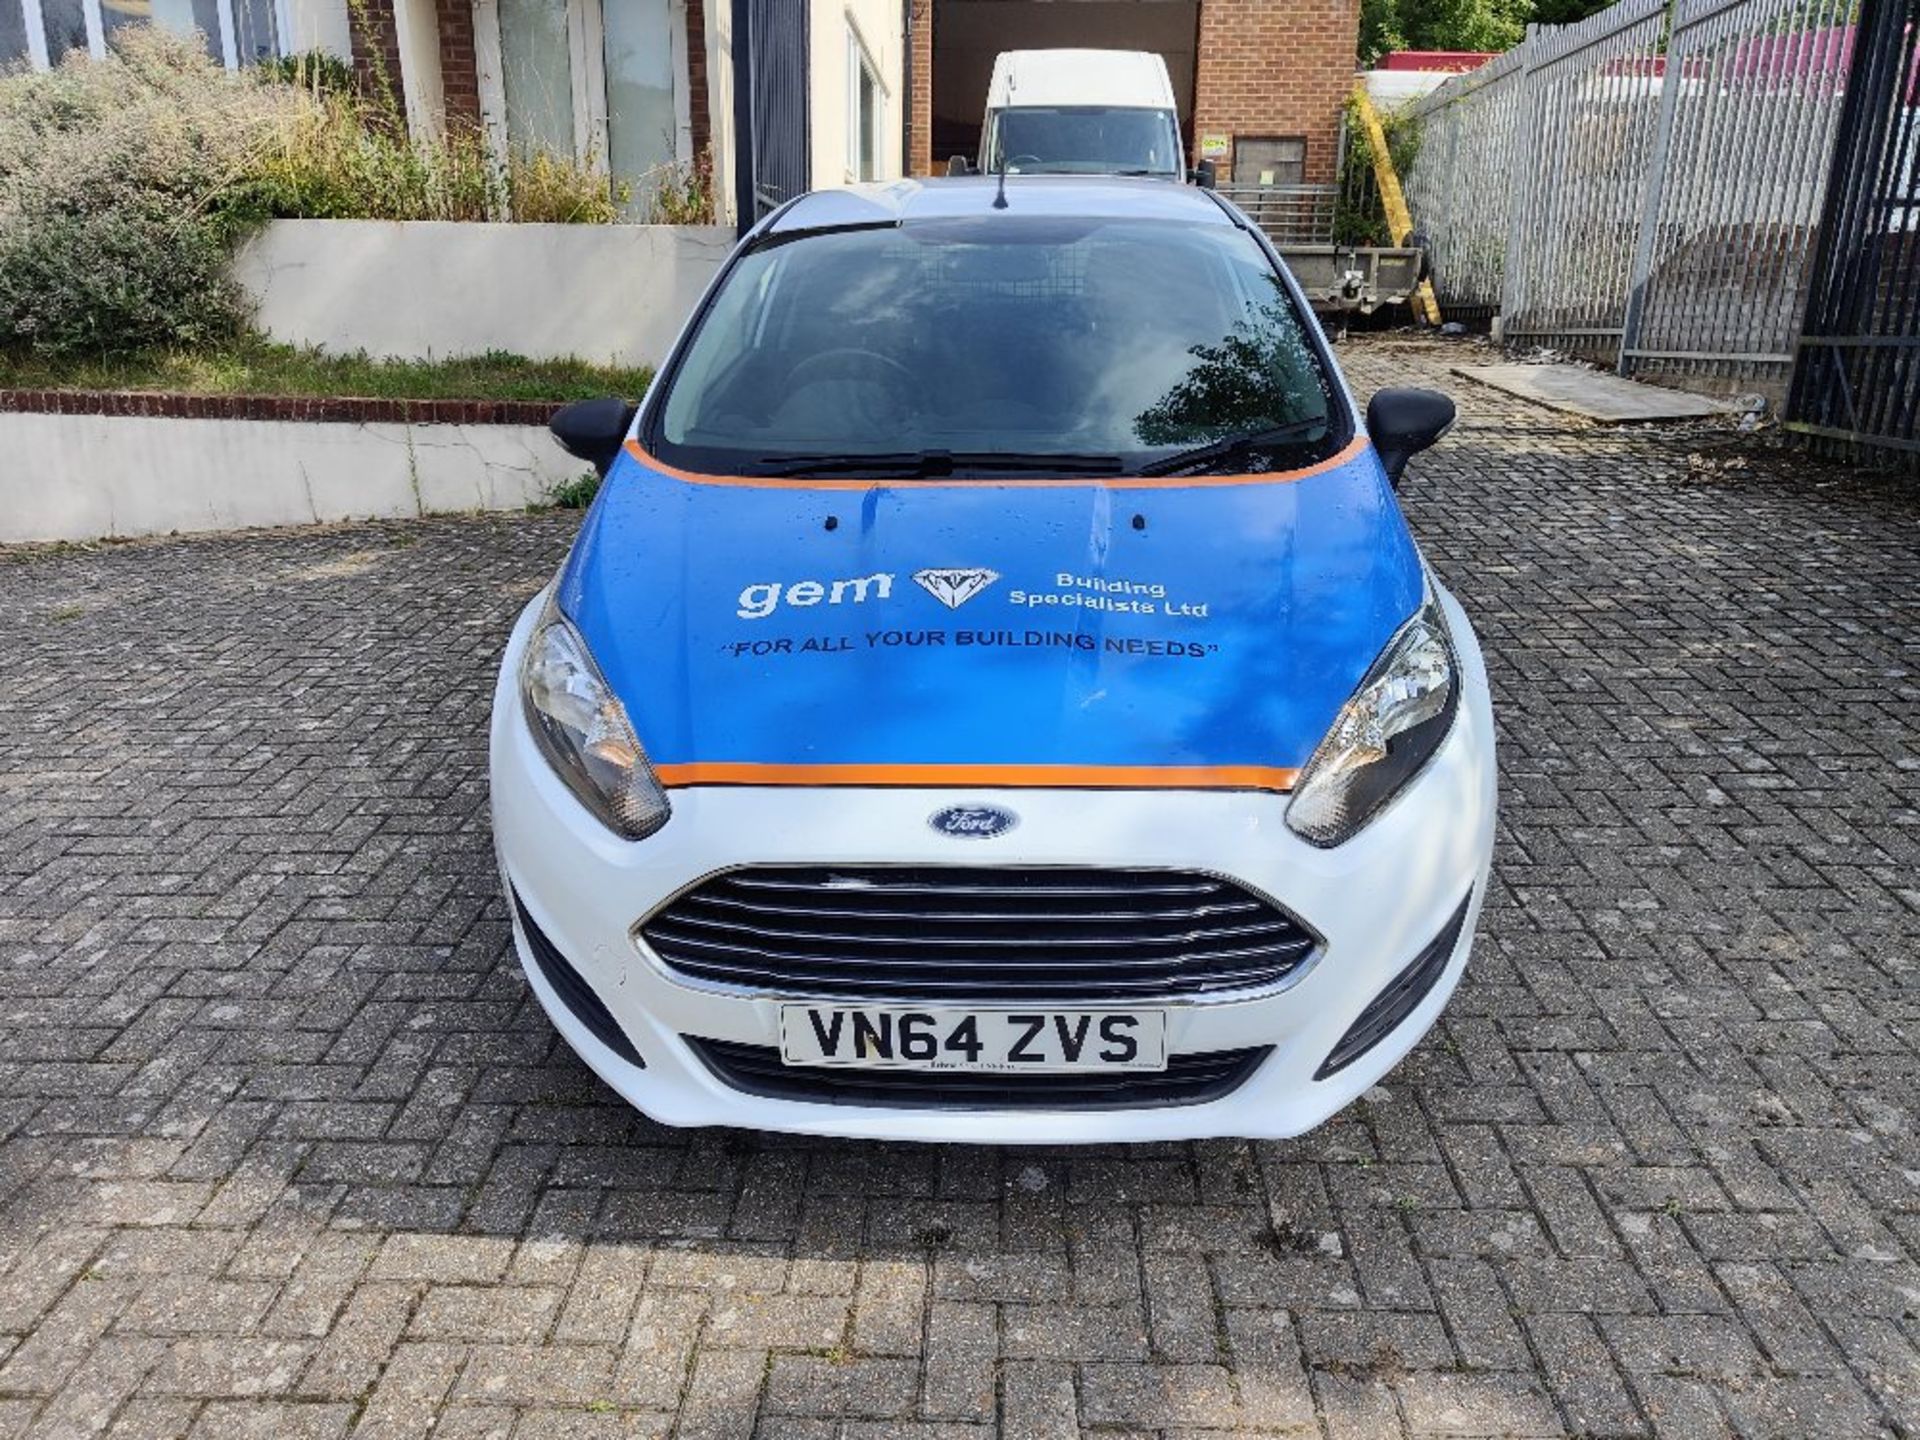 VN64 ZVS - Ford Fiesta BASE TDCI - Image 2 of 18